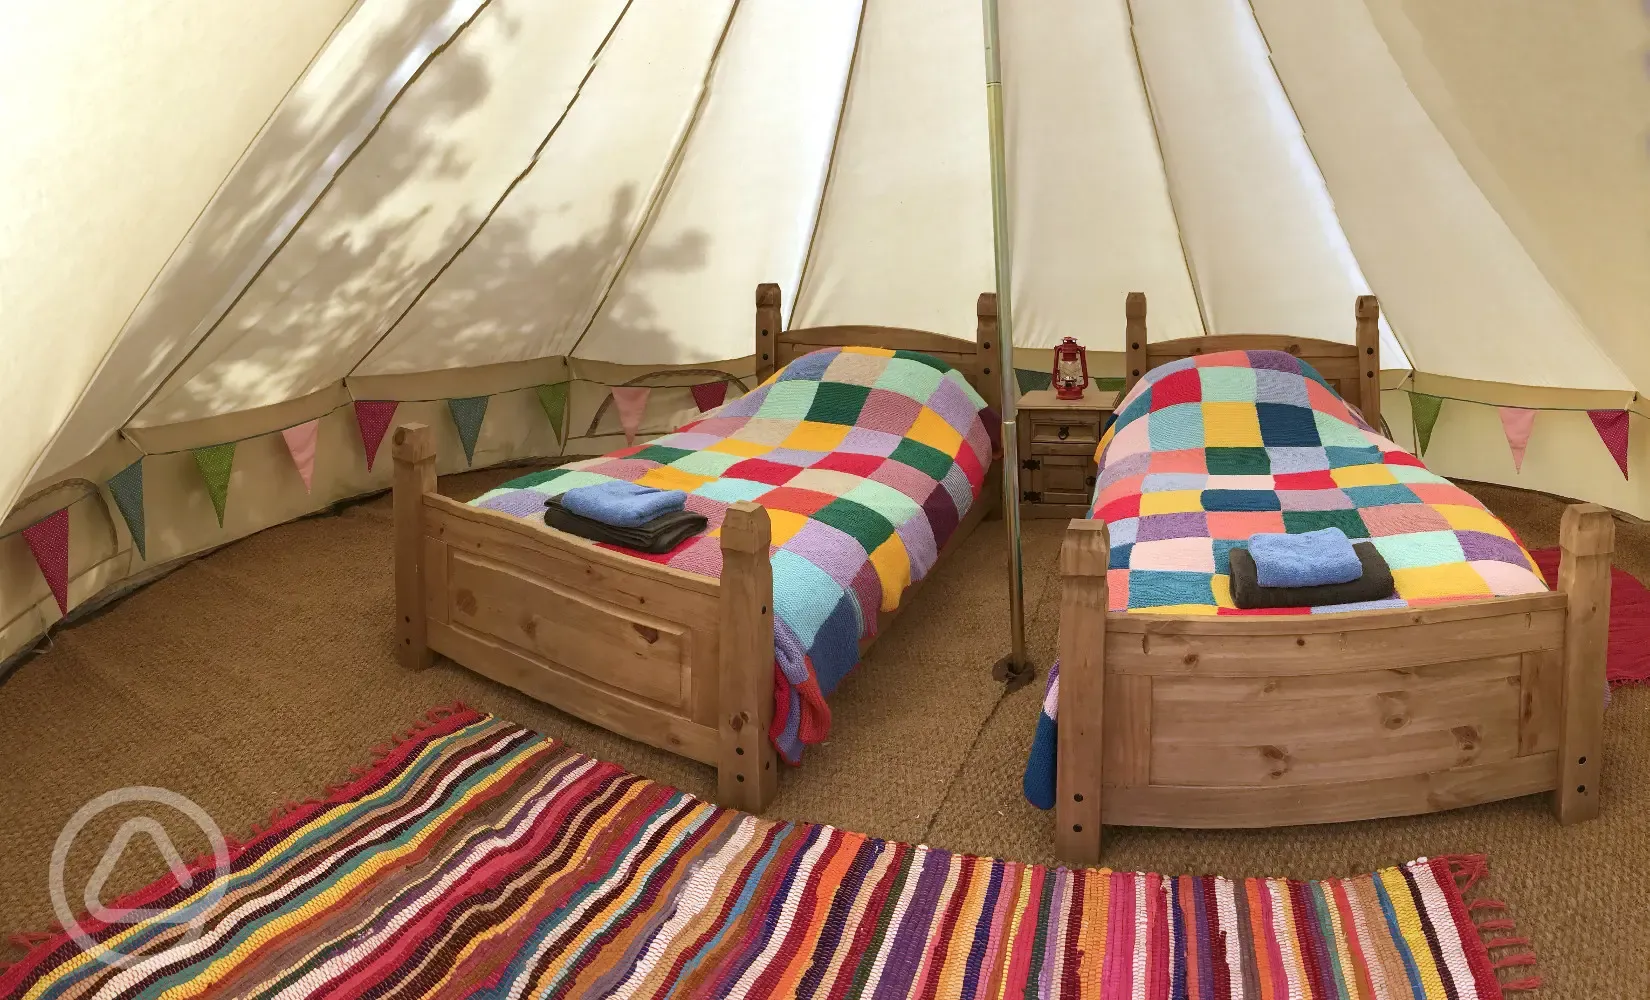 Inside the Bell Tent